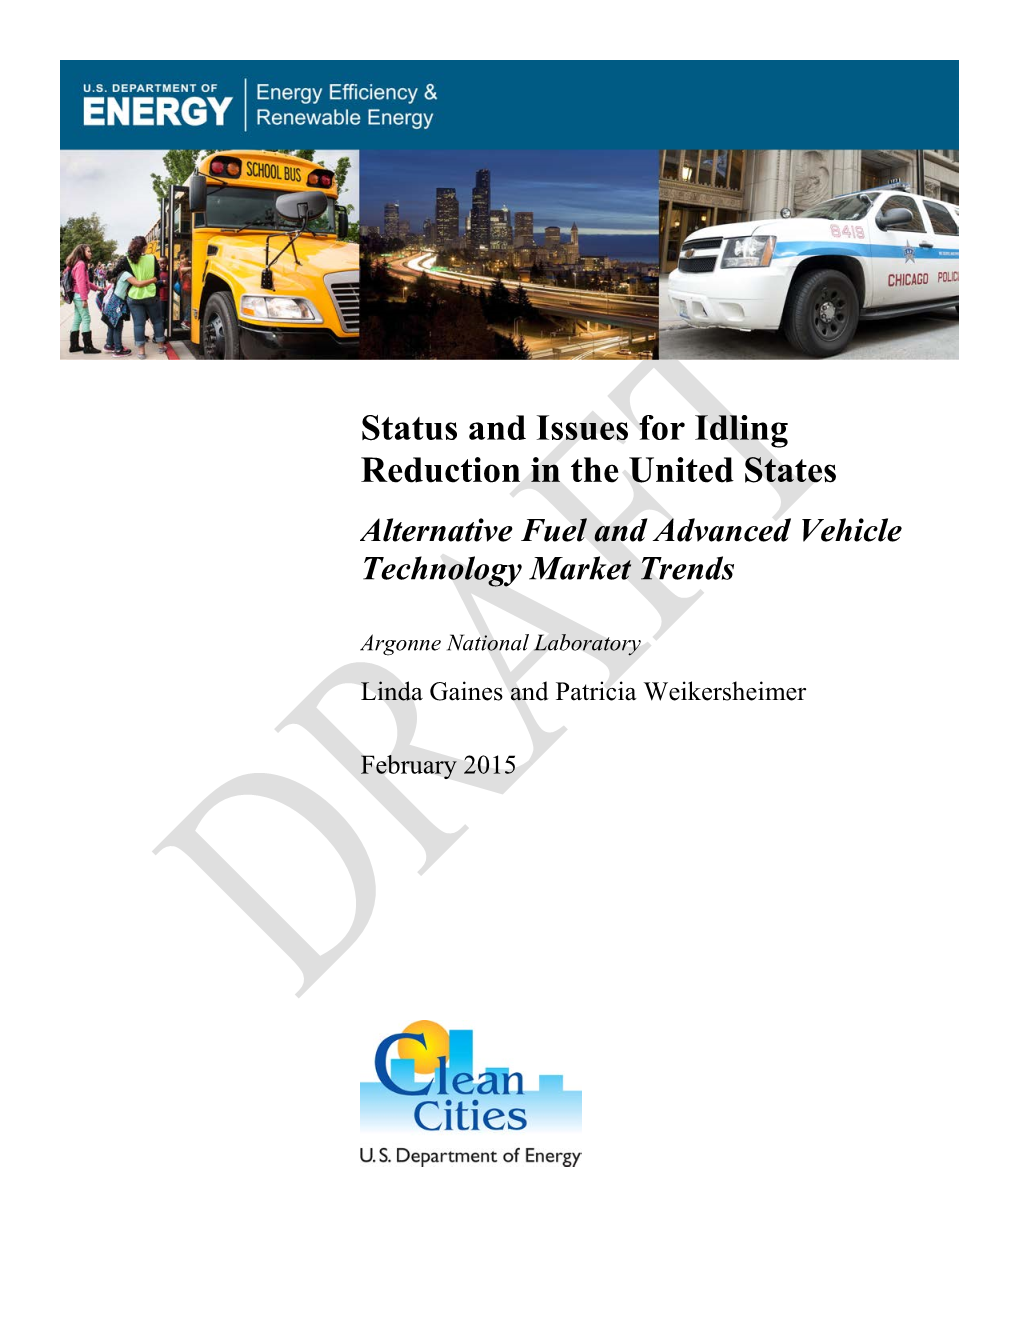 Status and Issues for Idling Reduction in the United States Alternative Fuel and Advanced Vehicle Technology Market Trends